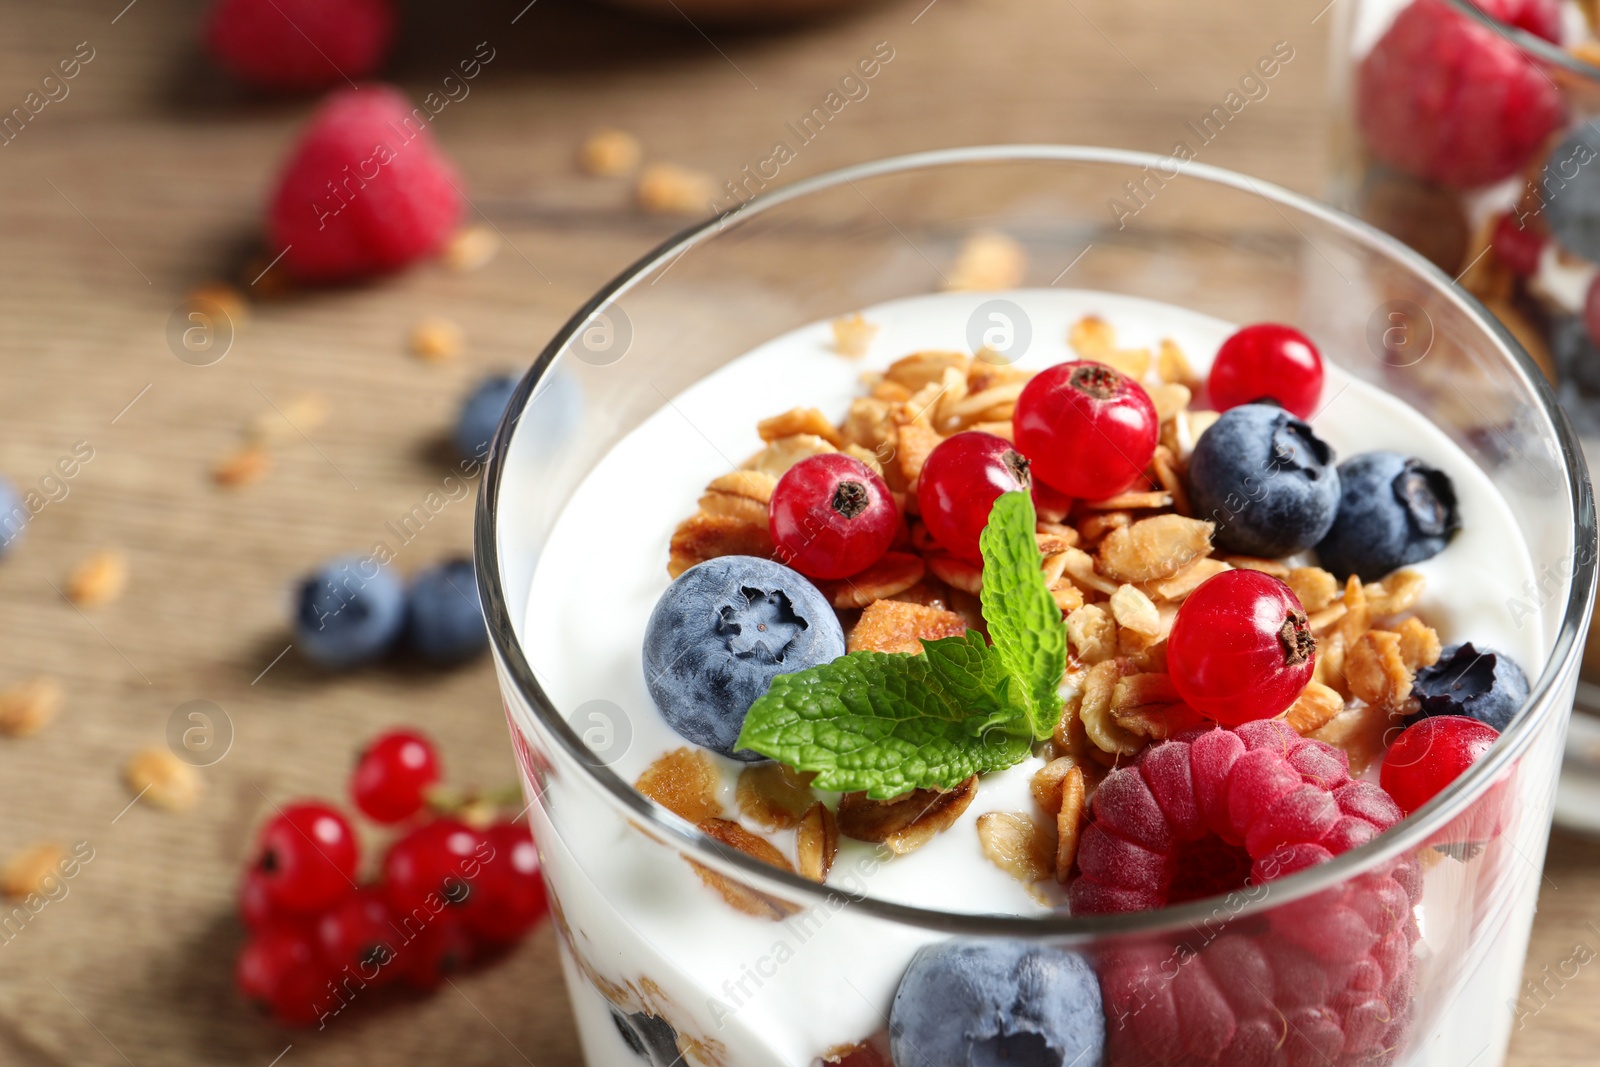 Image of Tasty dessert with yogurt, berries and granola on wooden table, closeup